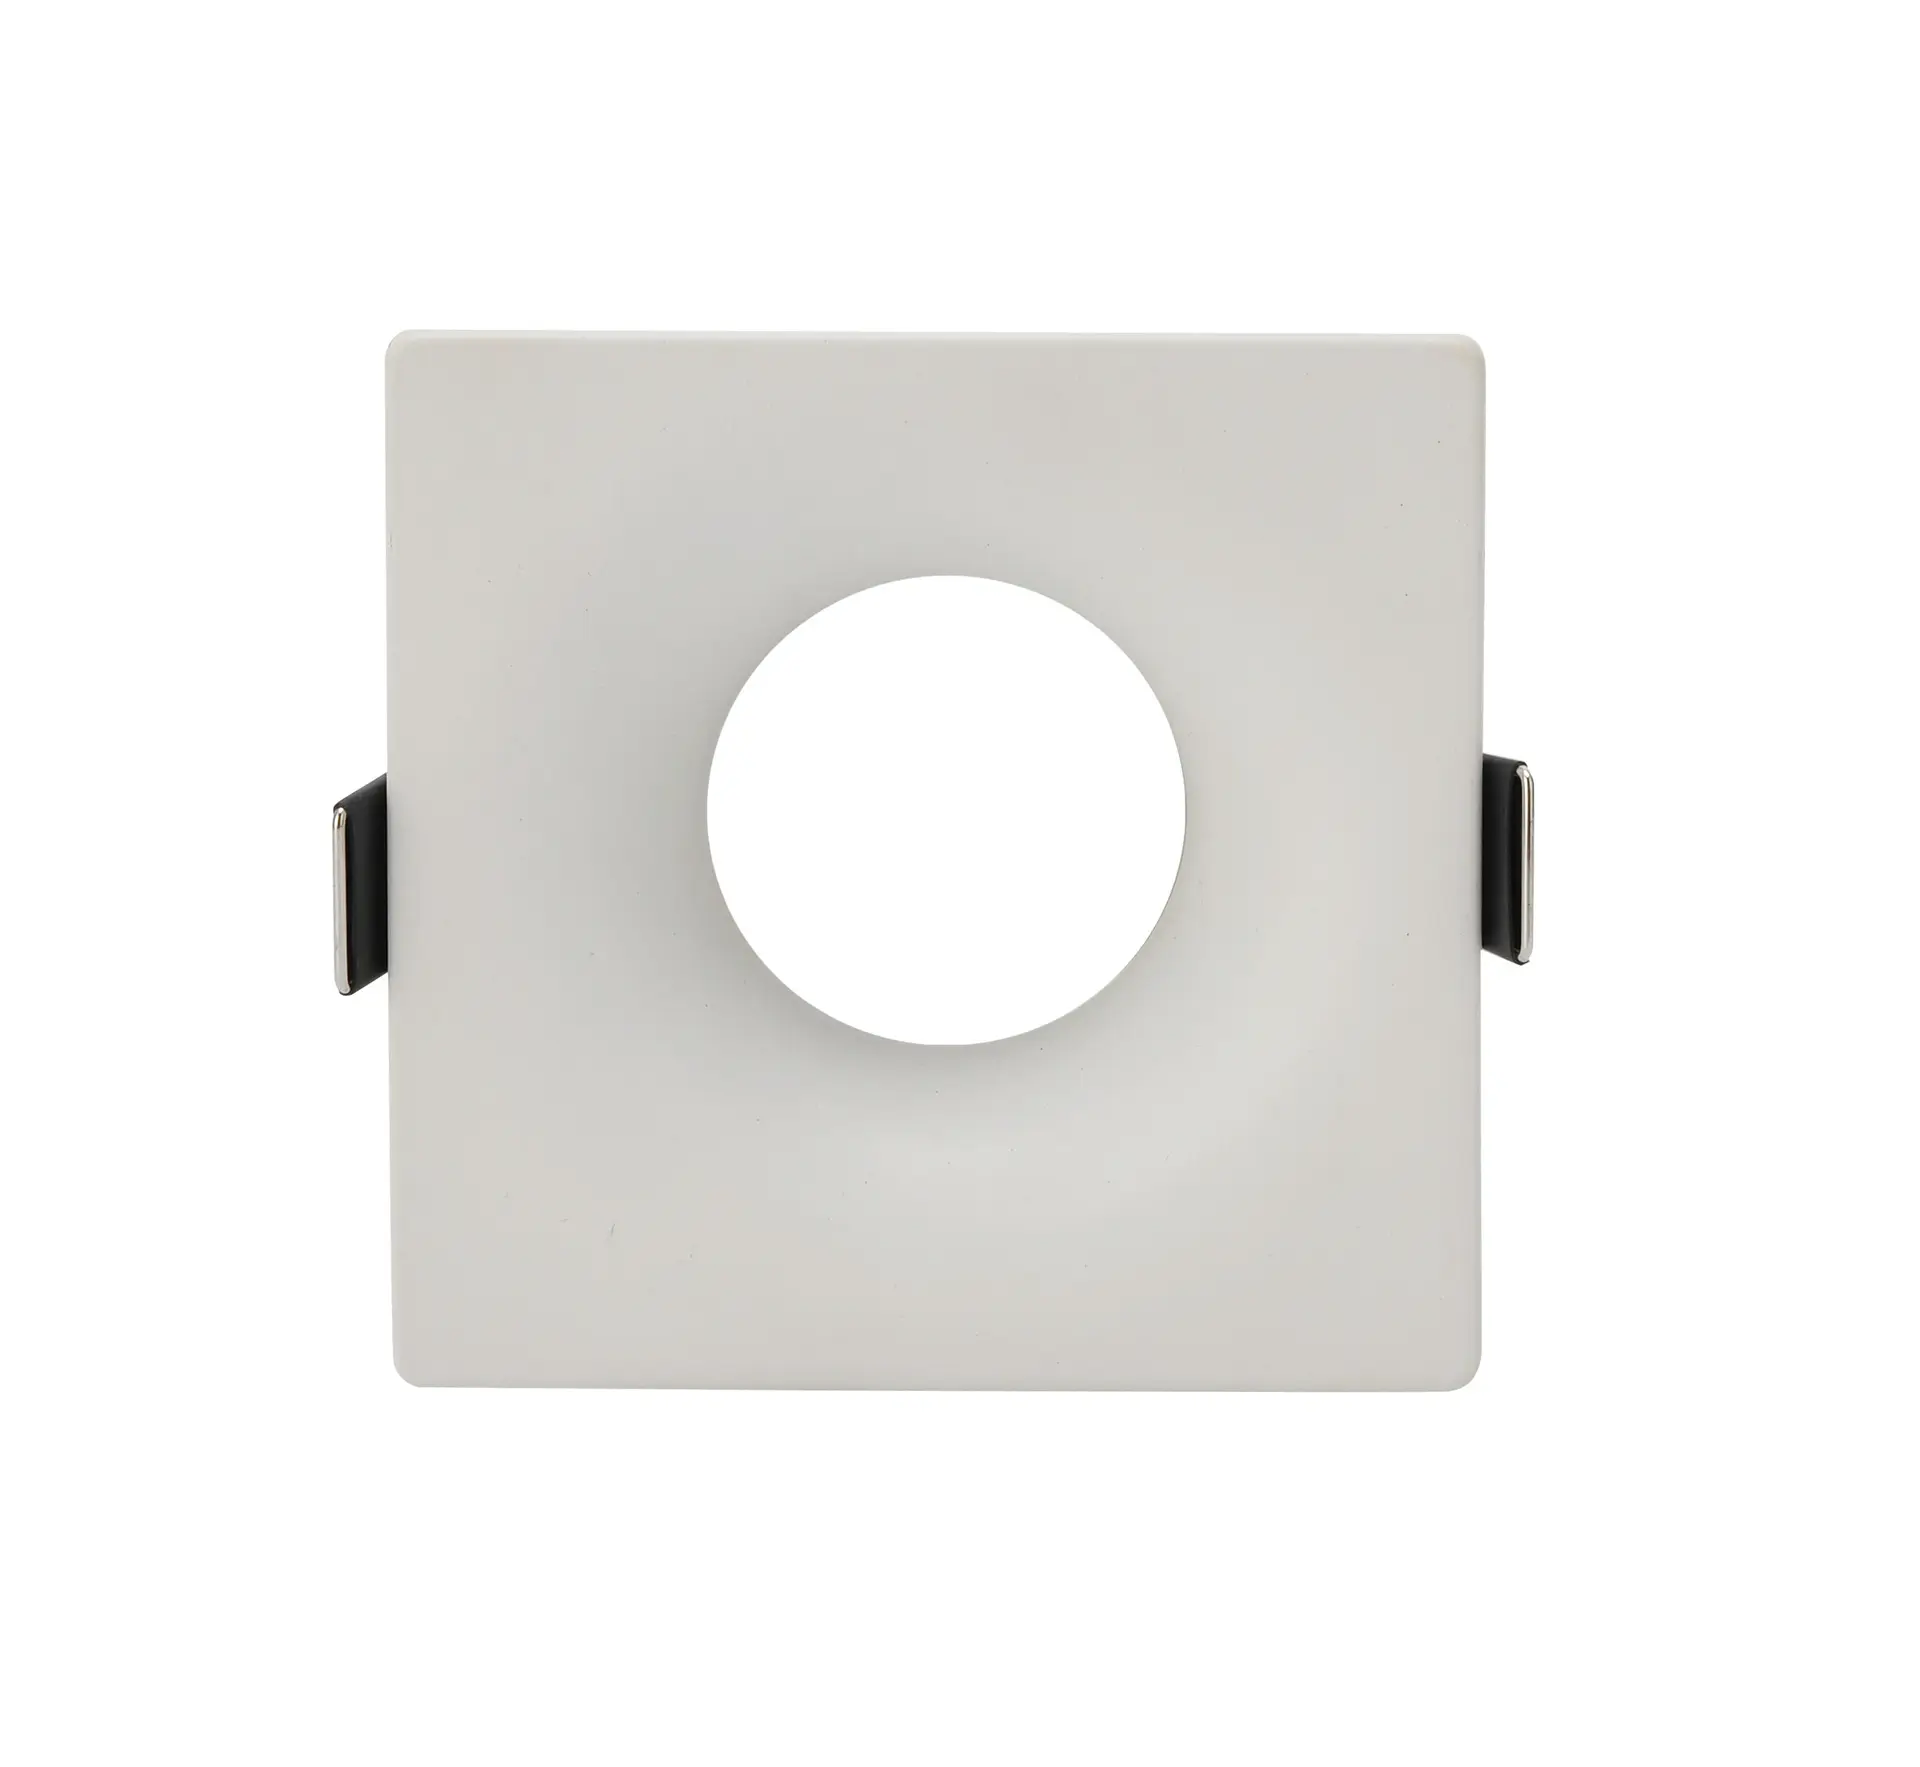 Hole Size 80mm GU10 MR16 Round and Square Anti-Glare LED Recessed Down light Spotlight